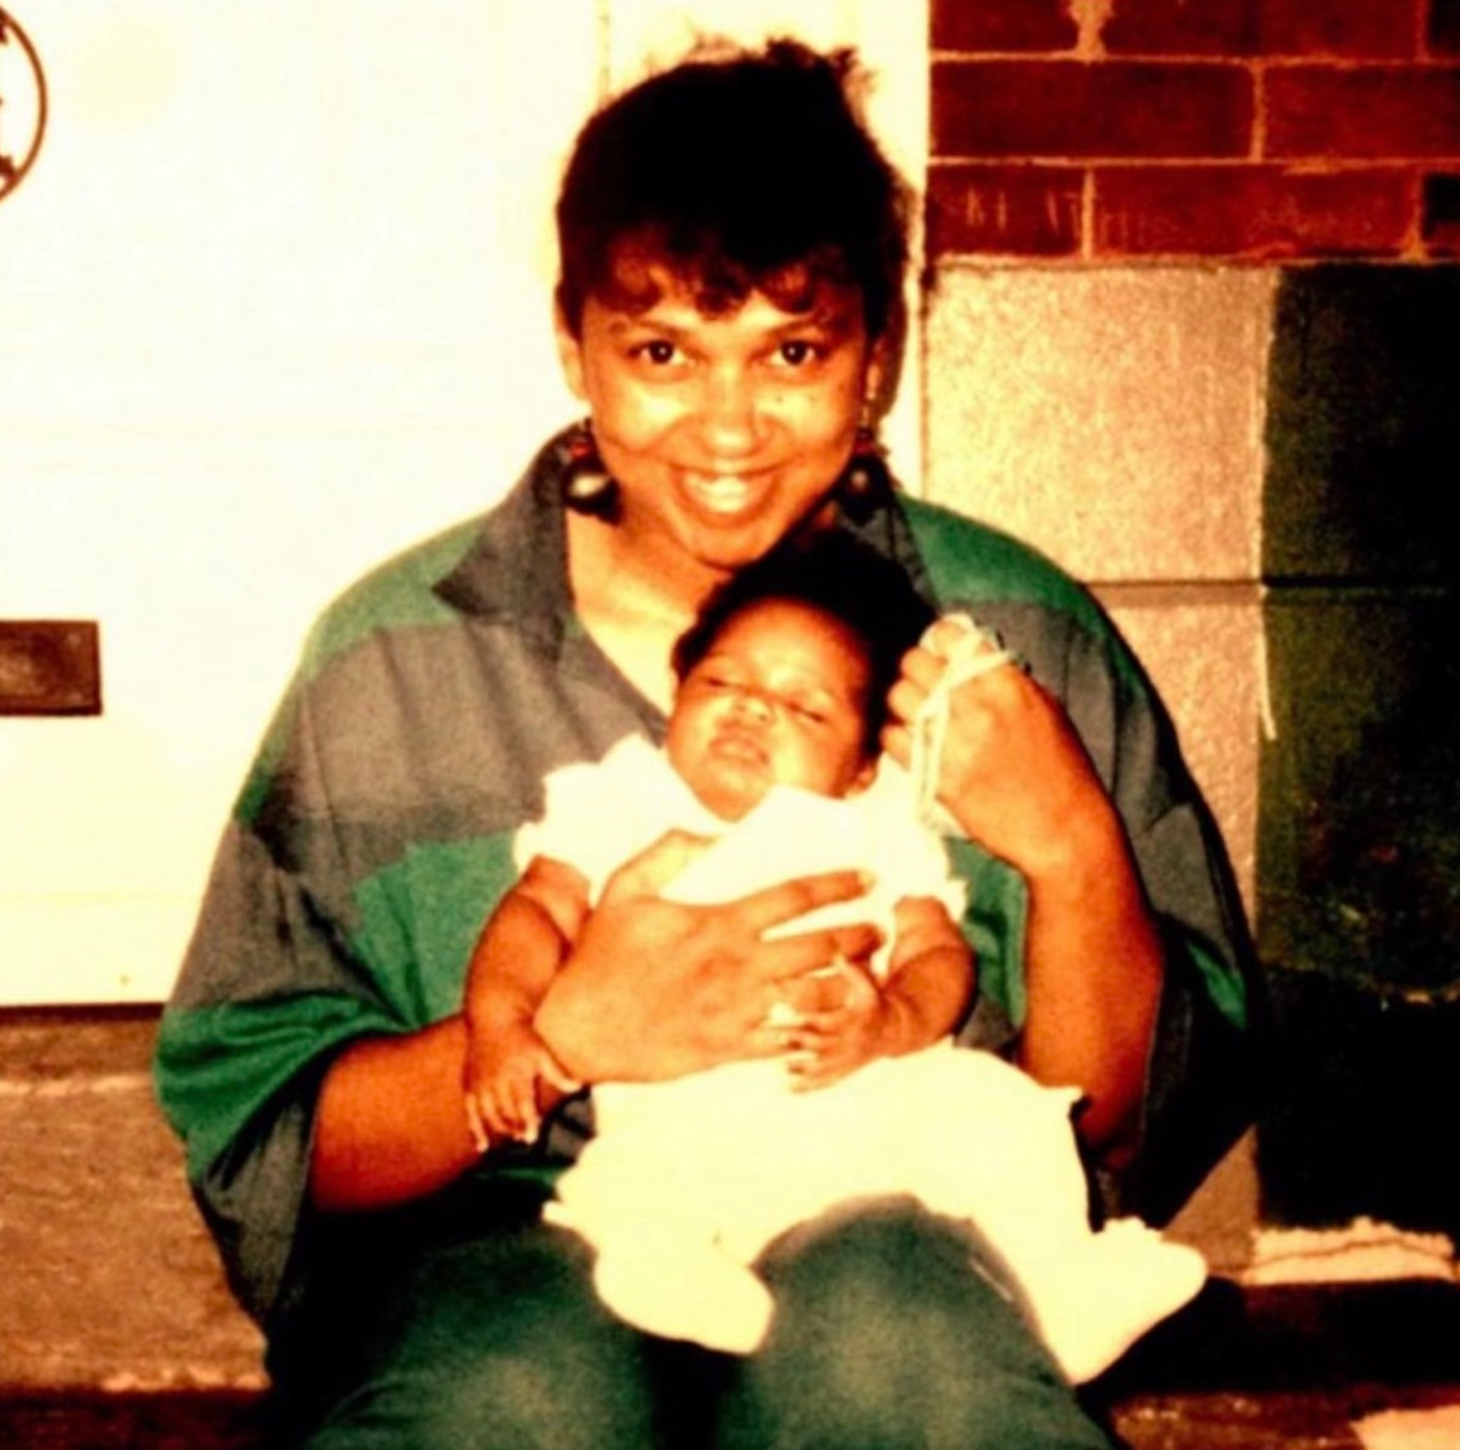 Jazmine Sullivan's mother holds her at a young age